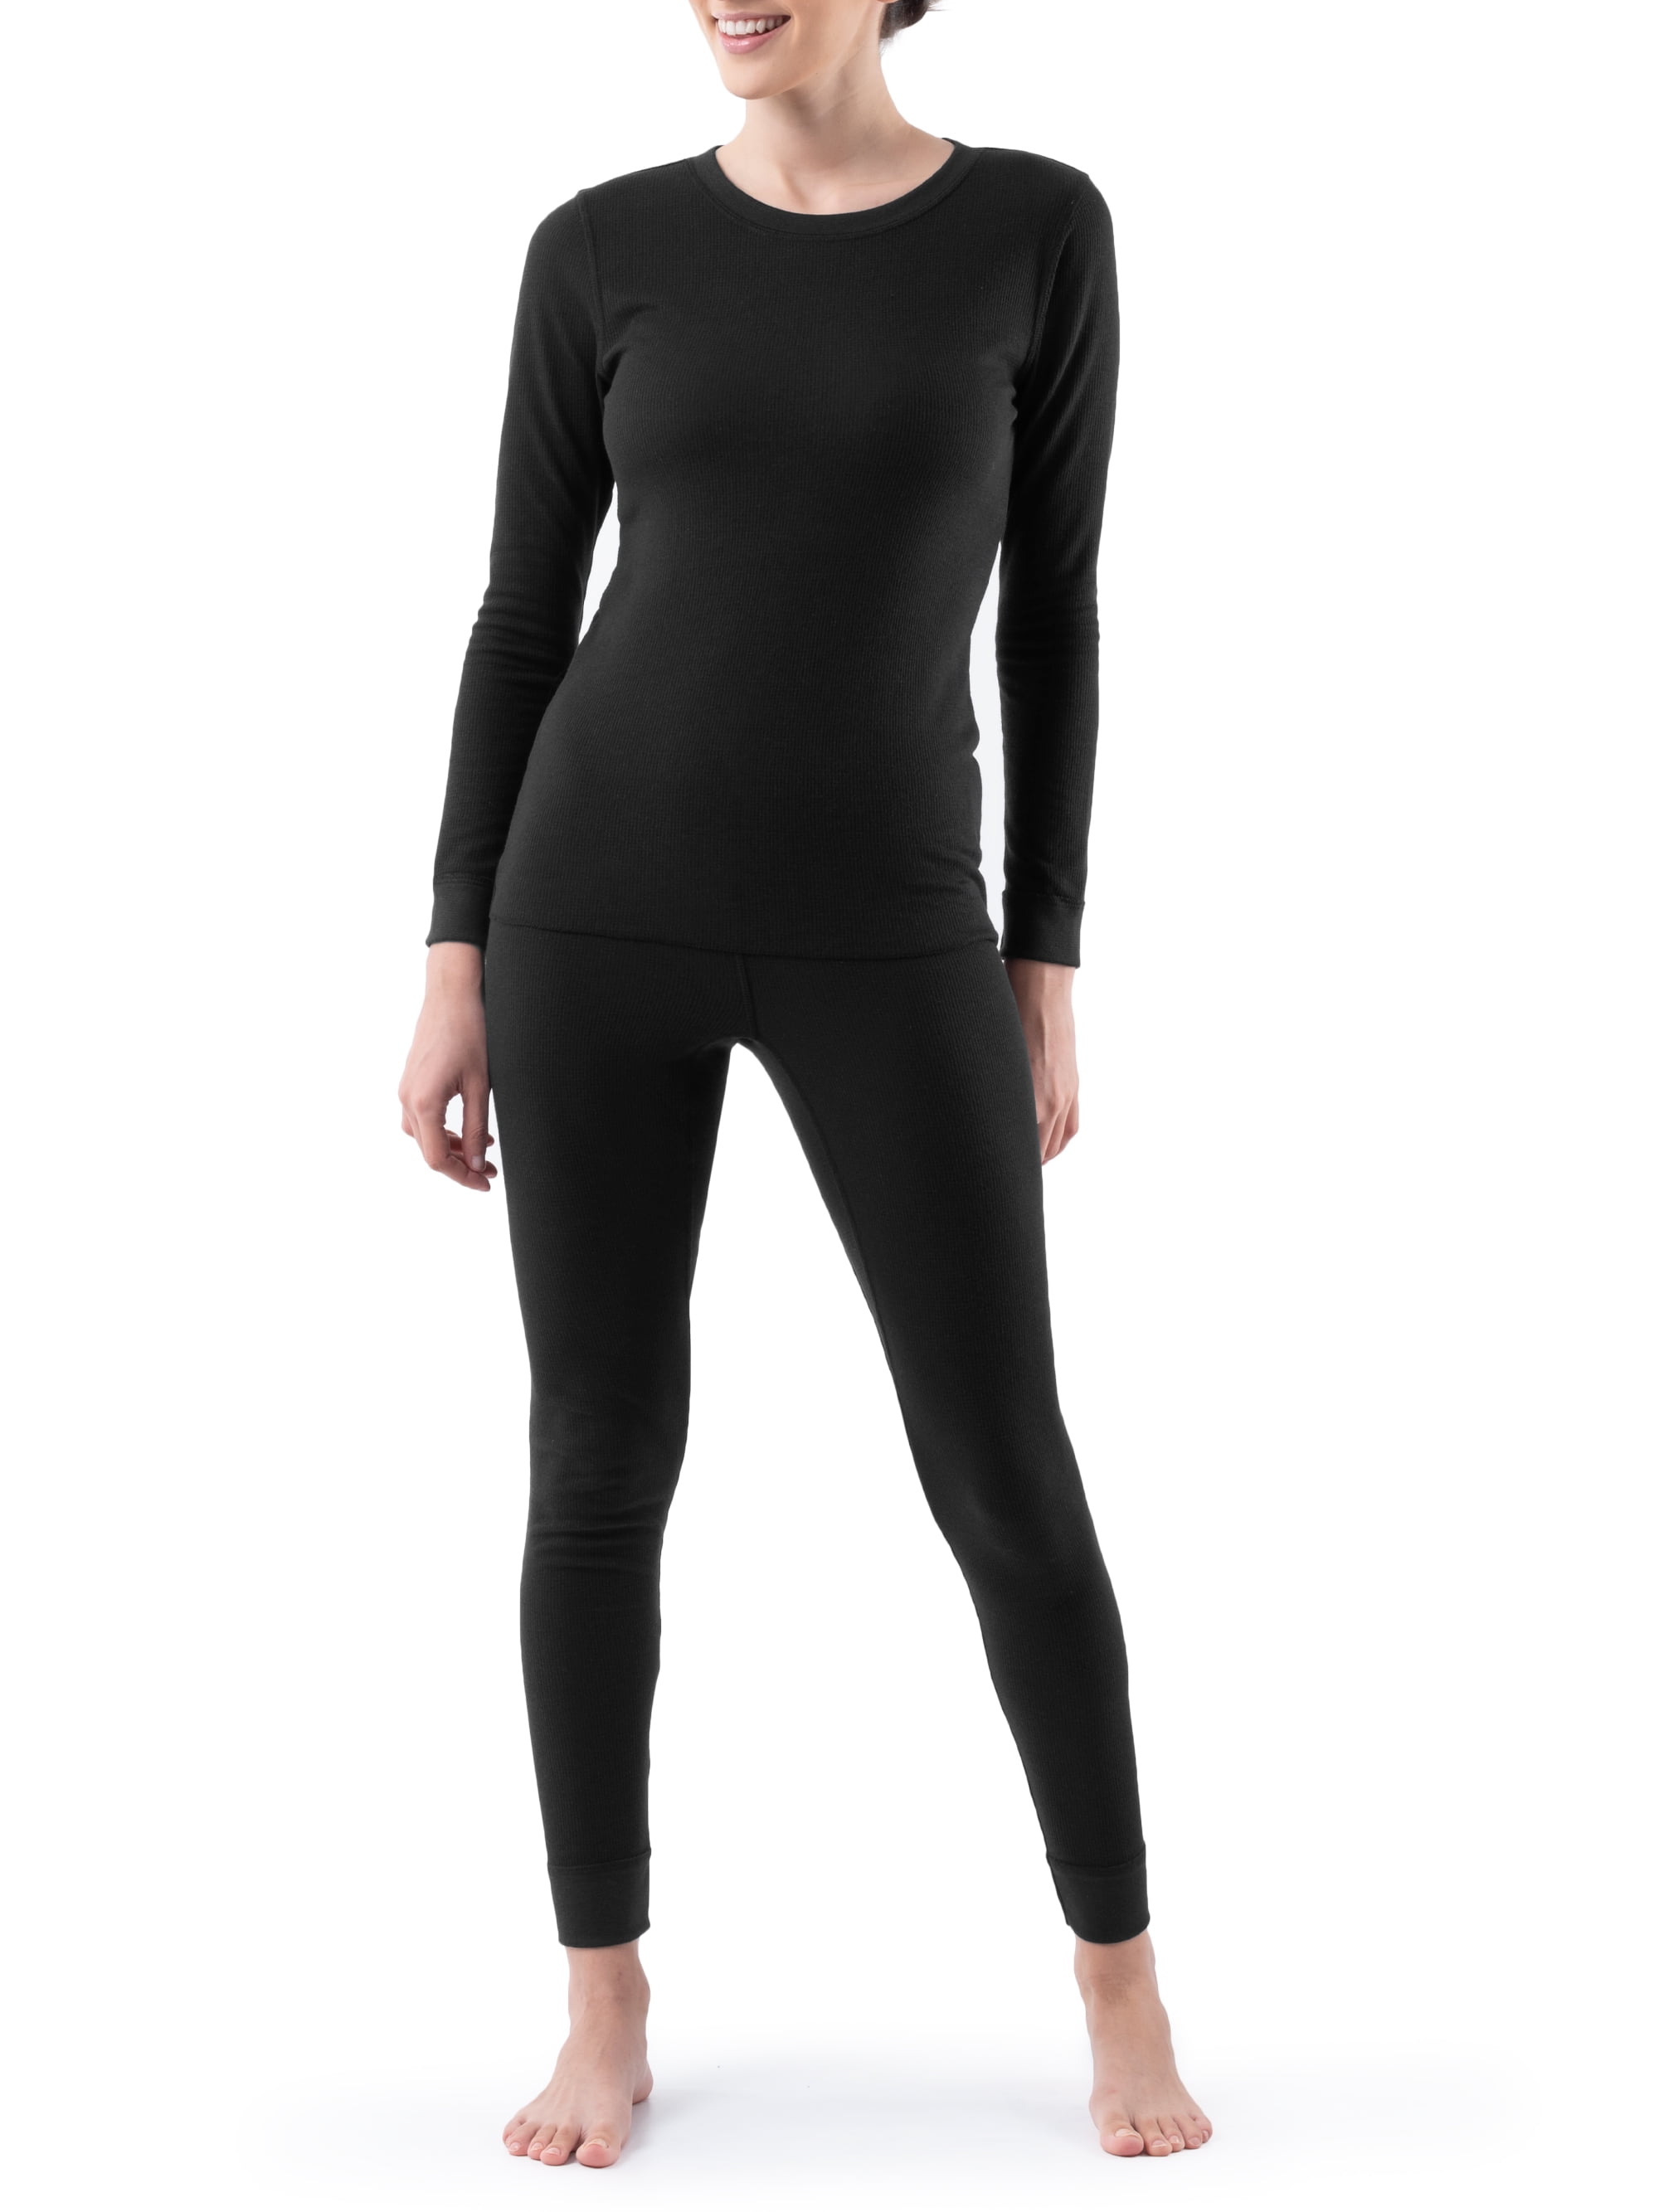 Fruit of the Loom Women's and Women's Plus Long Underwear Thermal Waffle  Top and Bottom Set - Walmart.com